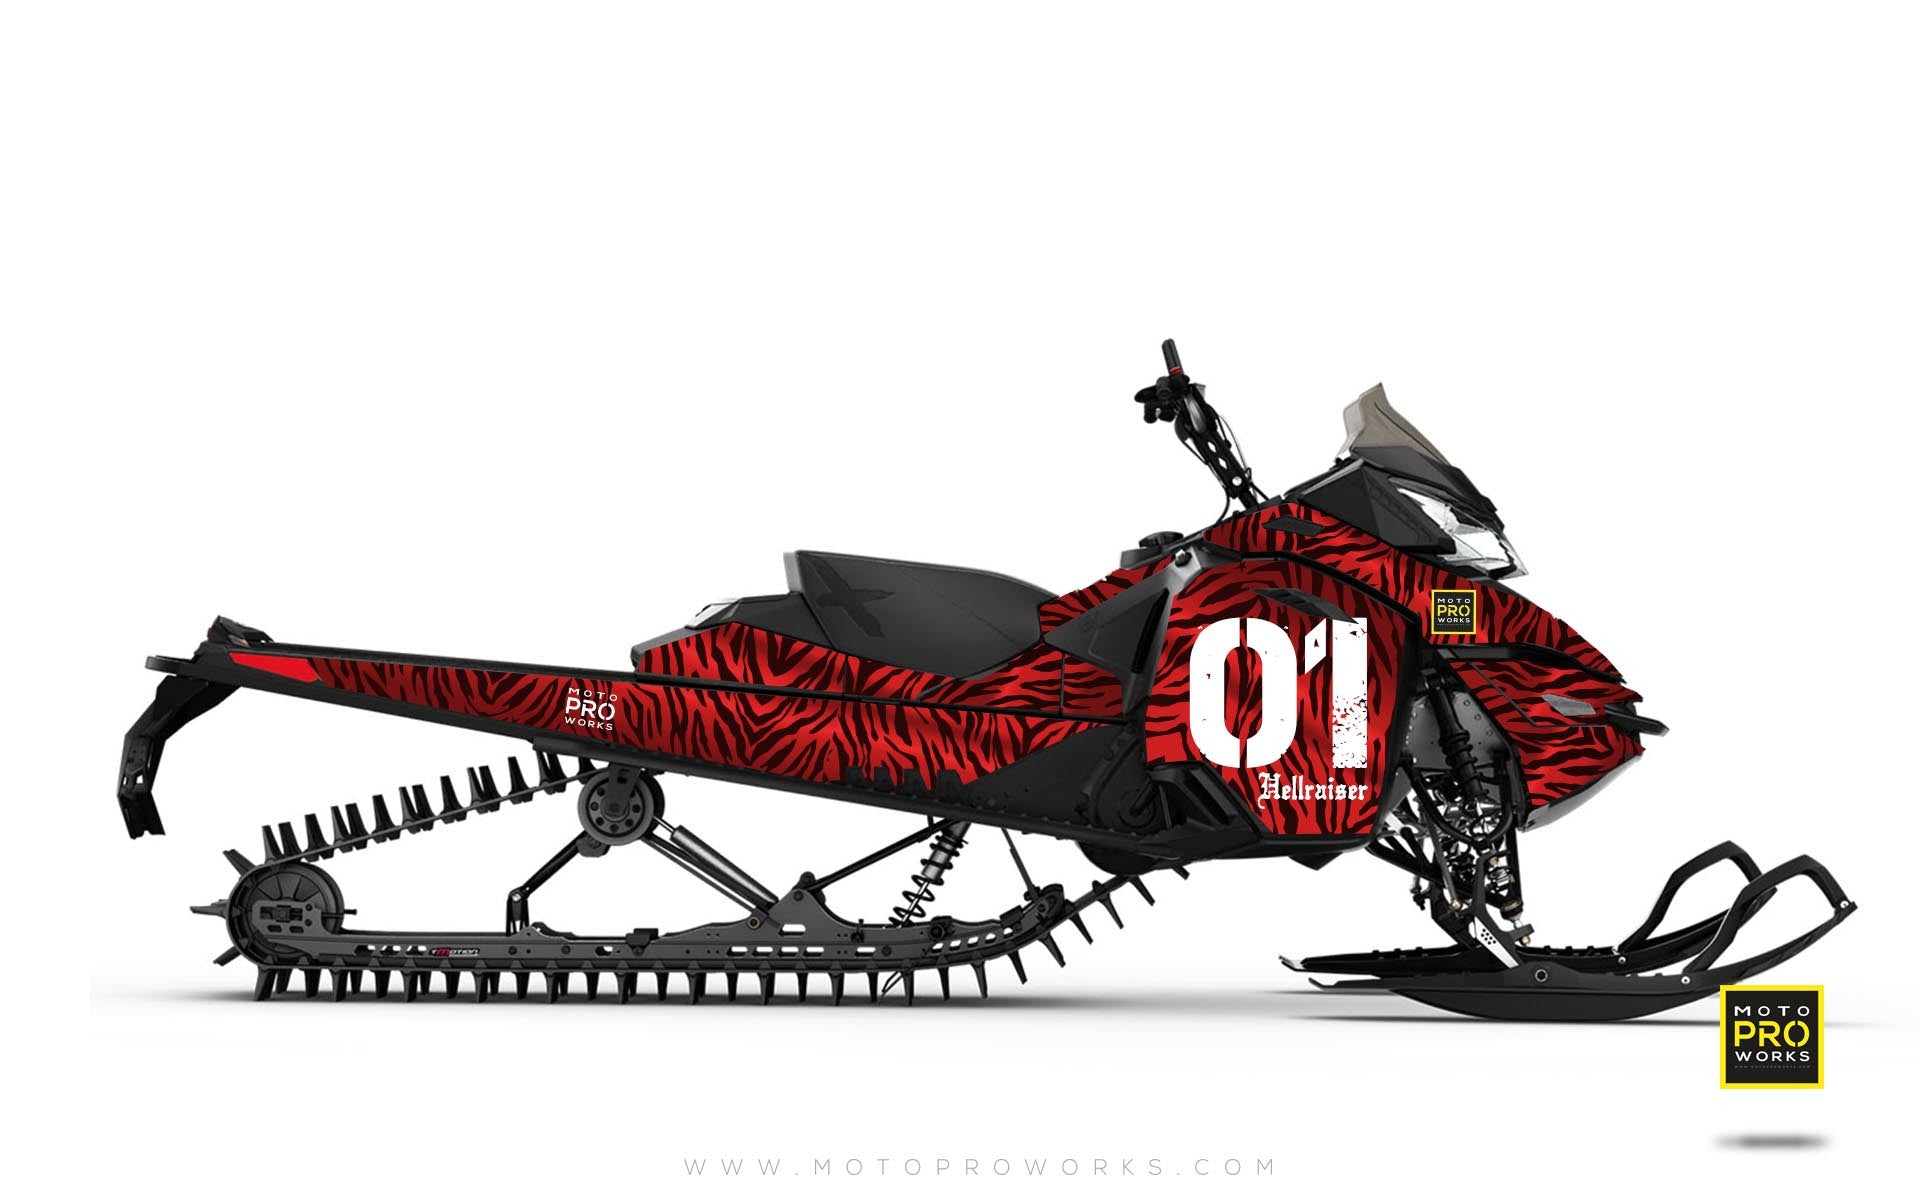 Ski-Doo Graphics - "Stripey" (solid red) - MotoProWorks | Decals and Bike Graphic kit